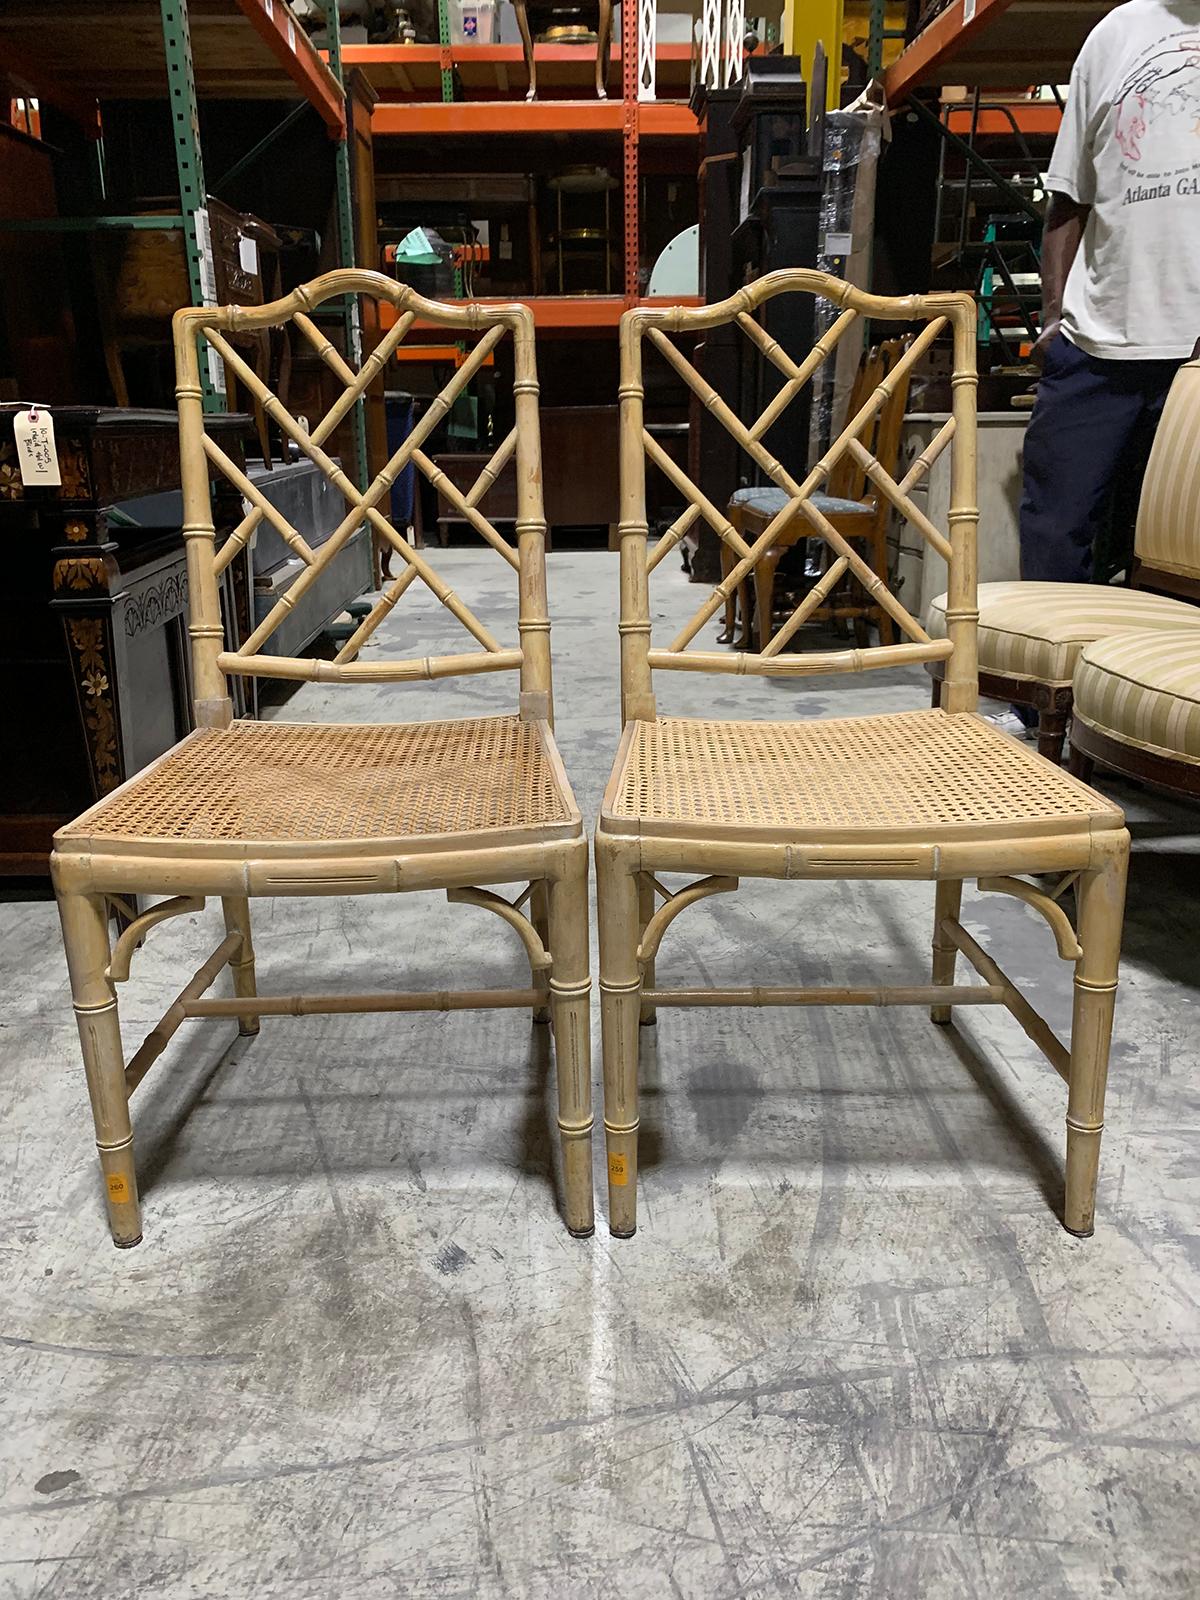 Pair of 20th century faux bamboo side chairs with cane seats
Measures: 18.5